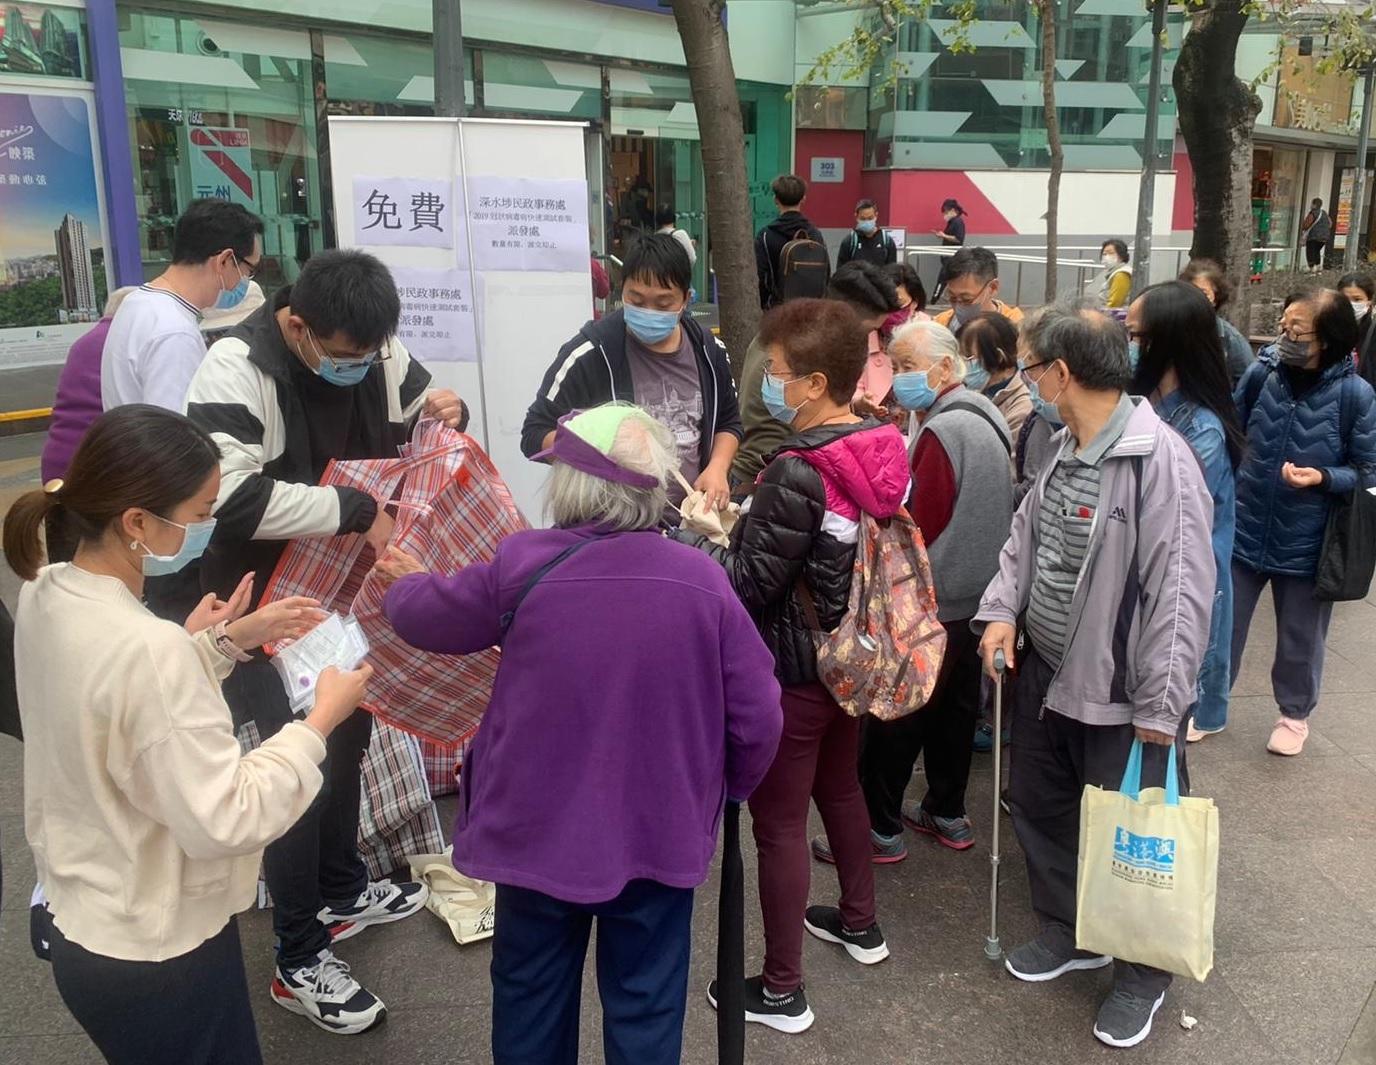 The Home Affairs Department and the Sham Shui Po District Office (SSPDO) has launched a number of measures in Sham Shui Po district to support residents fighting against the disease. Photo shows staff of the SSPDO distributing complimentary COVID-19 rapid testing kits to residents in Sham Shui Po district today (January 20).